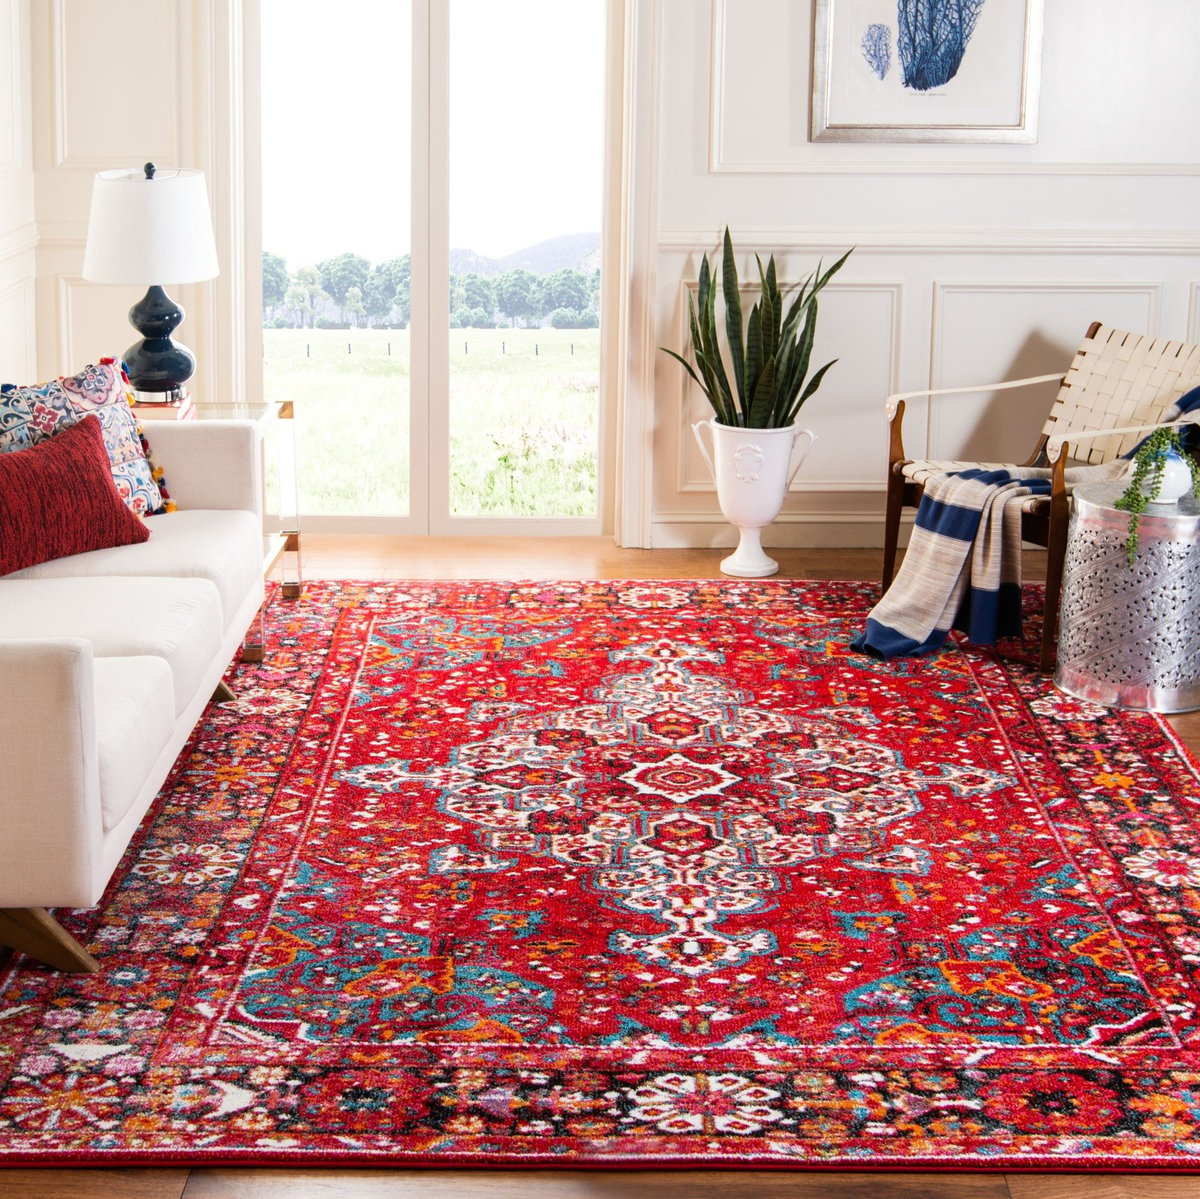 Safavieh Vintage Hamadan Vth 222 Rugs, Red White And Blue Area Rugs